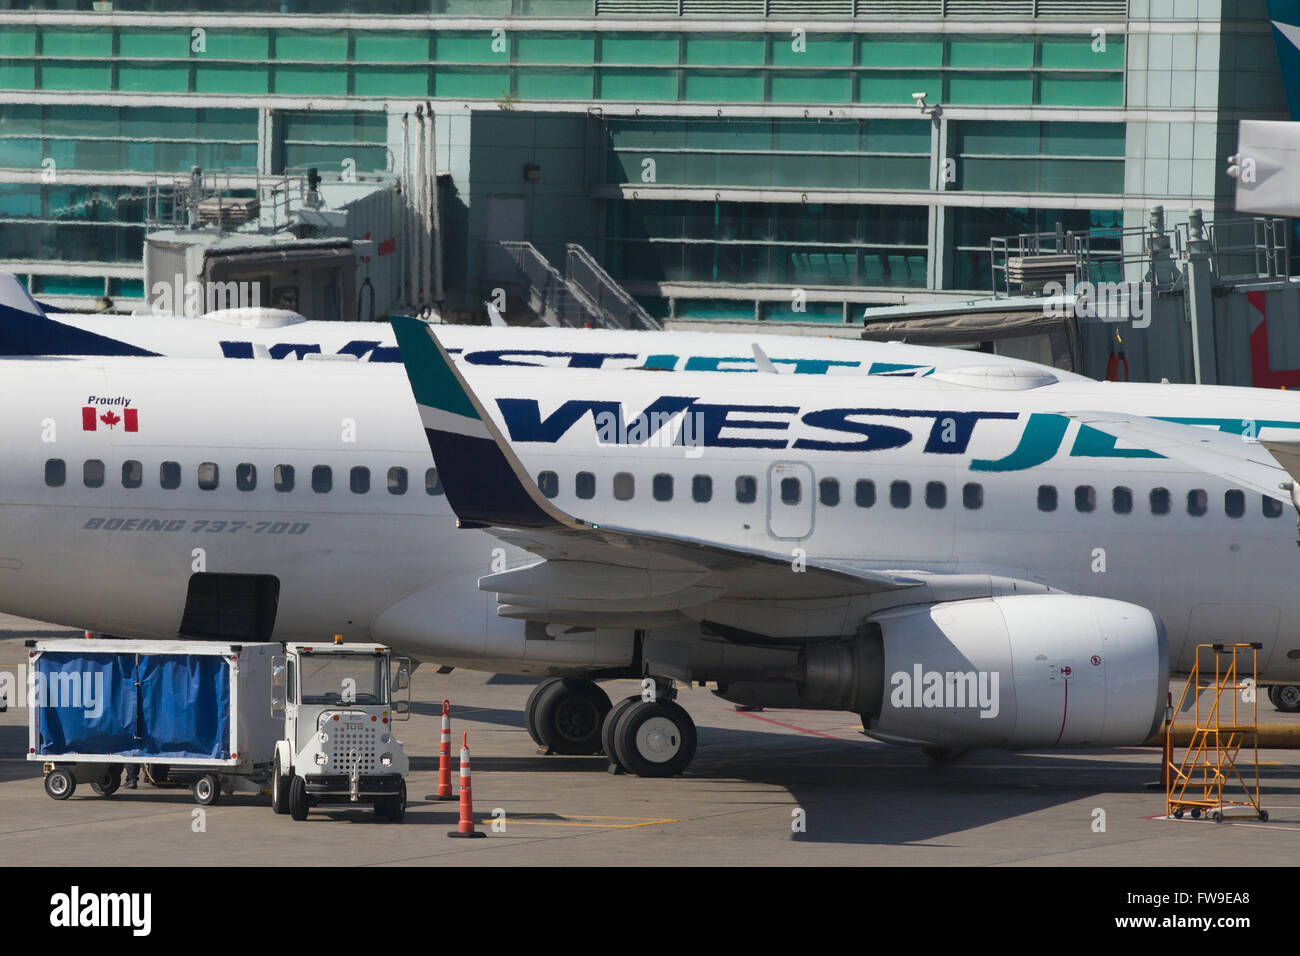 A Westjet aircraft waits to be loaded before departing from Pearson International airport in Toronto, Ontario on May 7, 2015. Stock Photo